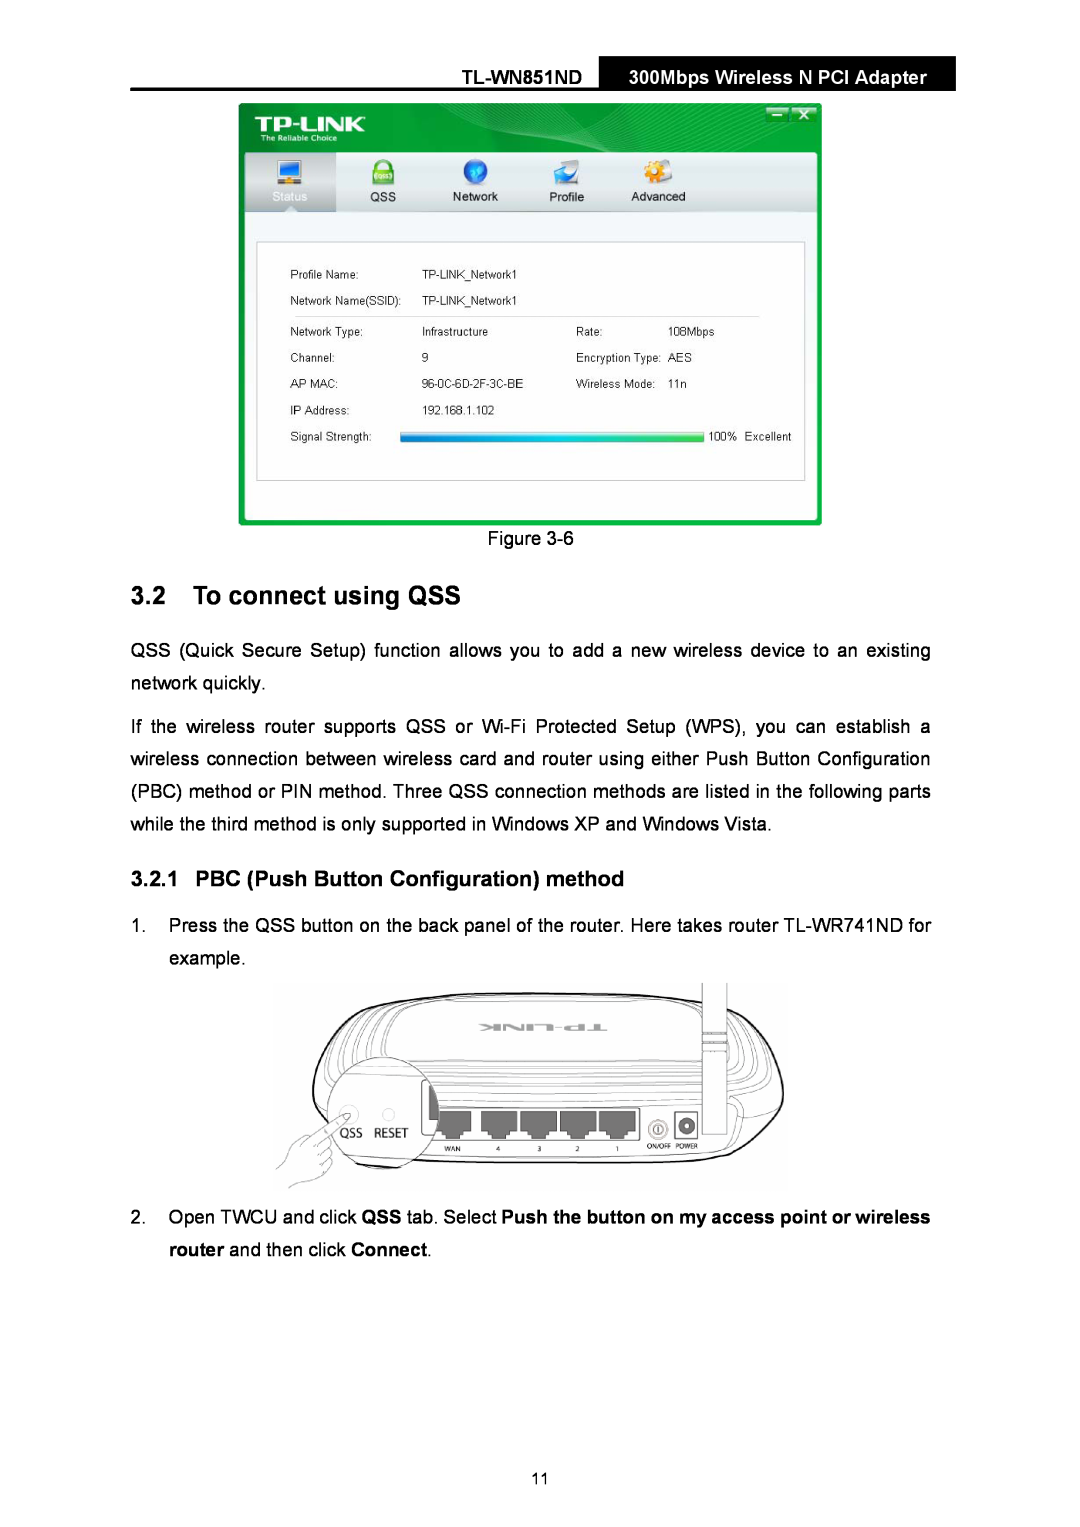 TP-Link TL-WN851ND manual To connect using QSS, PBC Push Button Configuration method, 300Mbps Wireless N PCI Adapter 